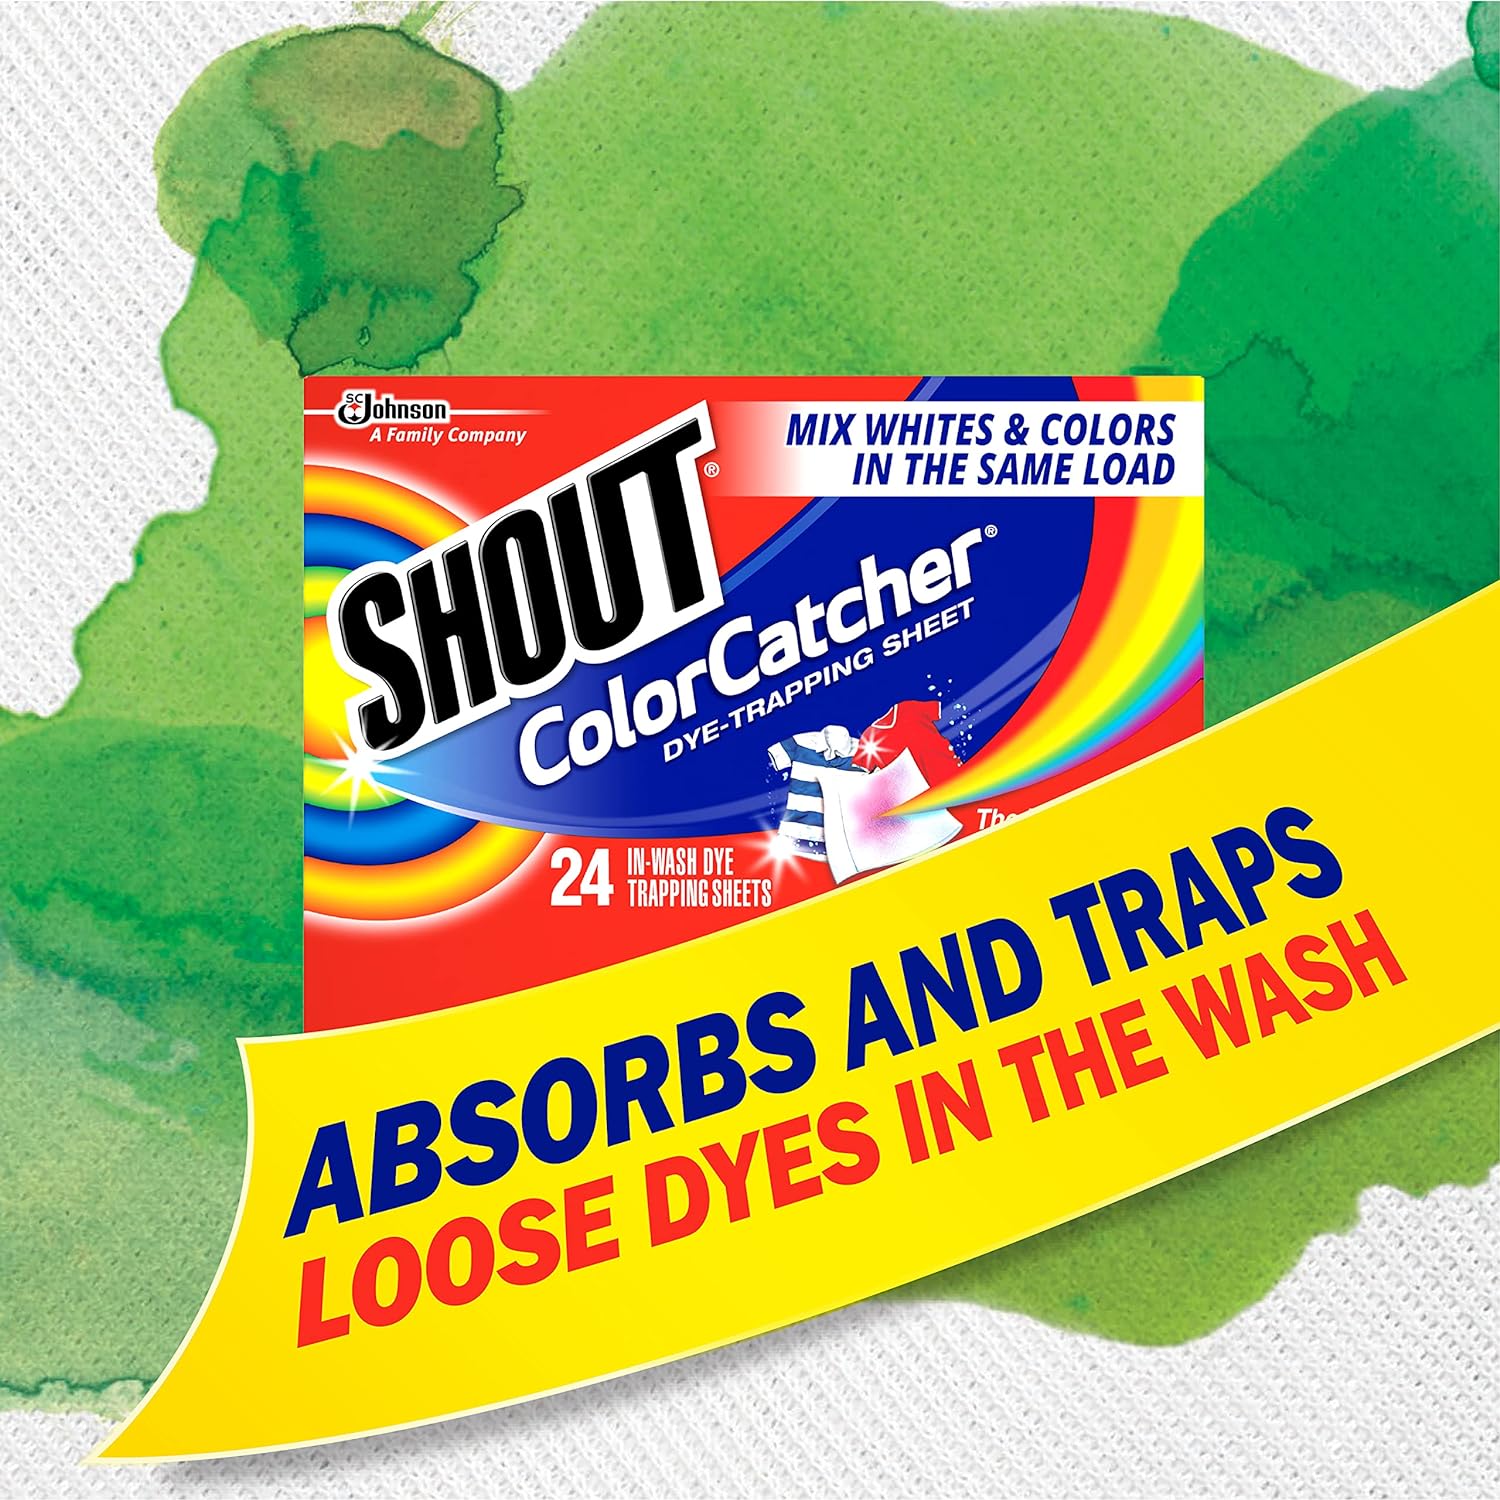 Shout Color Catcher Sheets for Laundry, Allow mixed washes, Prevent color runs, and Maintain original color of clothing, 72 Count - Pack of 2 (144 Total Sheets) : Health & Household